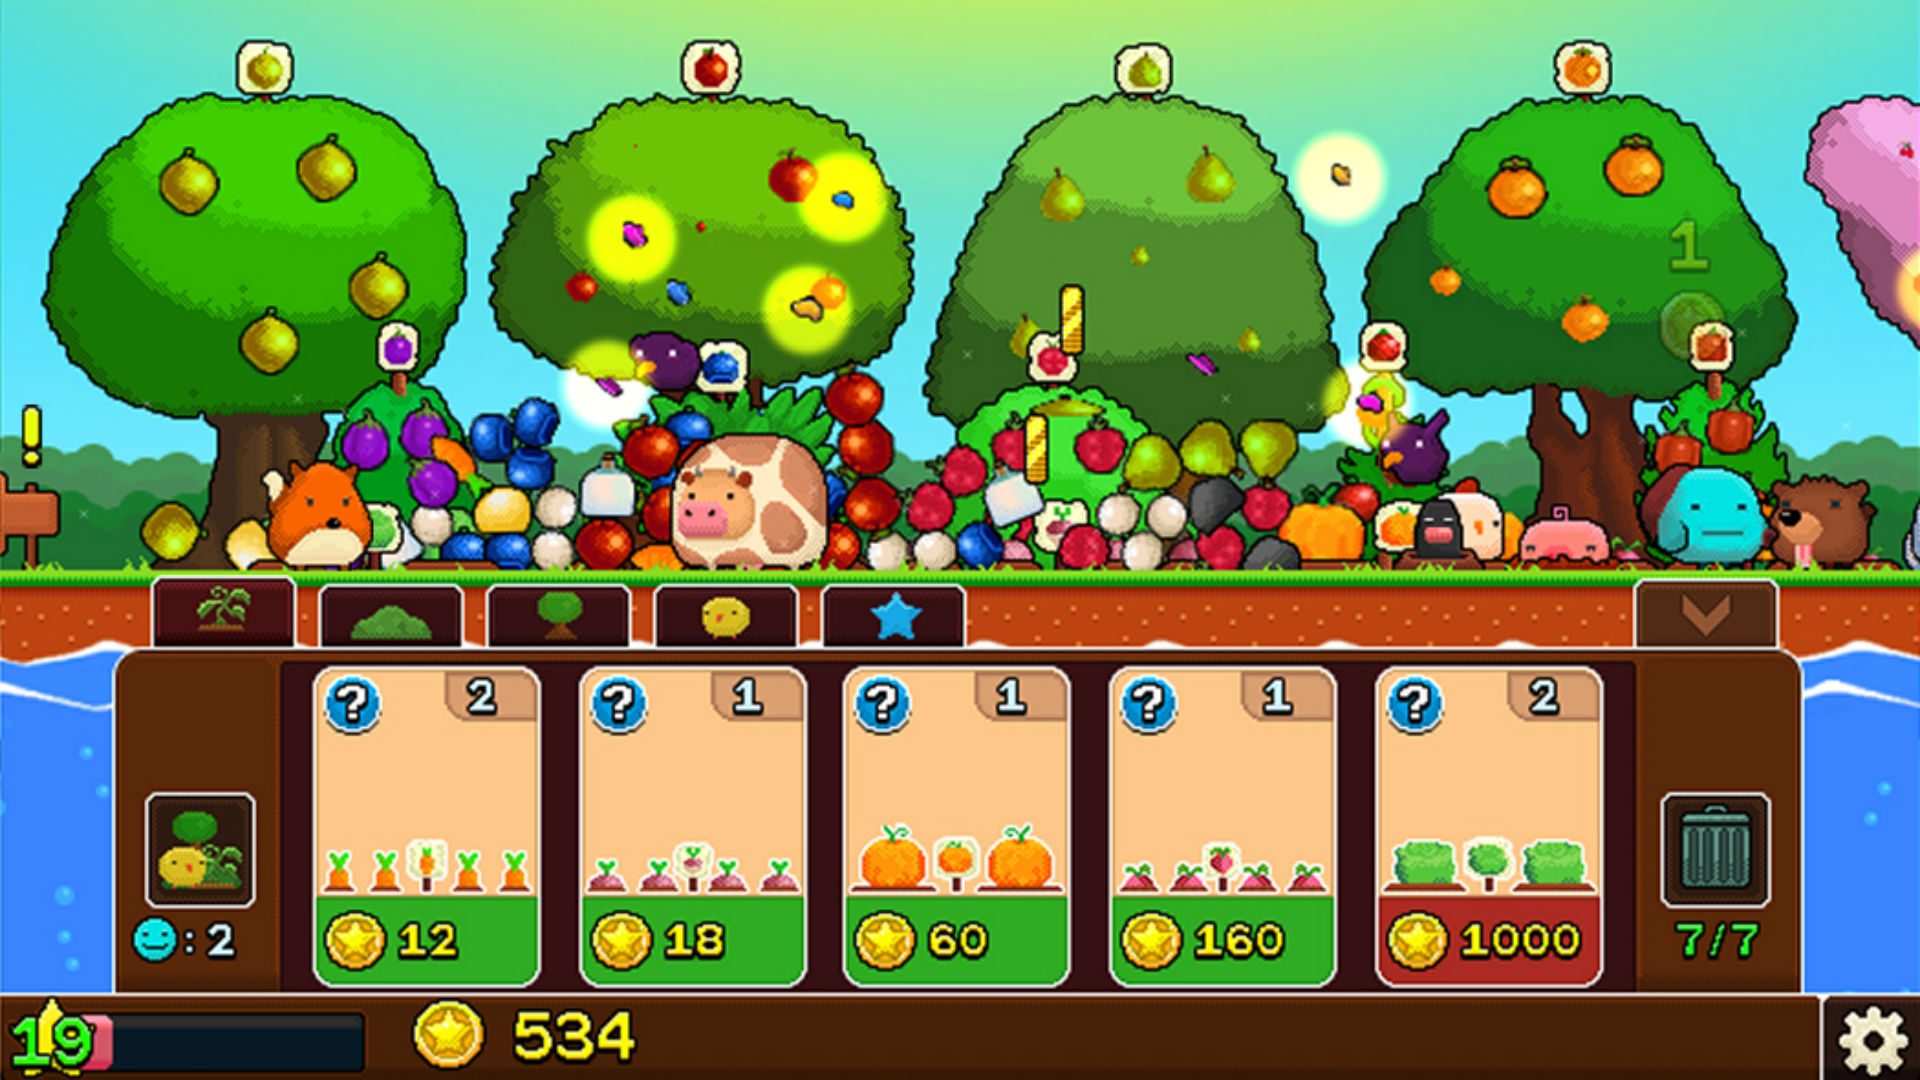 Best clicker games: Plantera. A screenshot shows four trees being harvested.